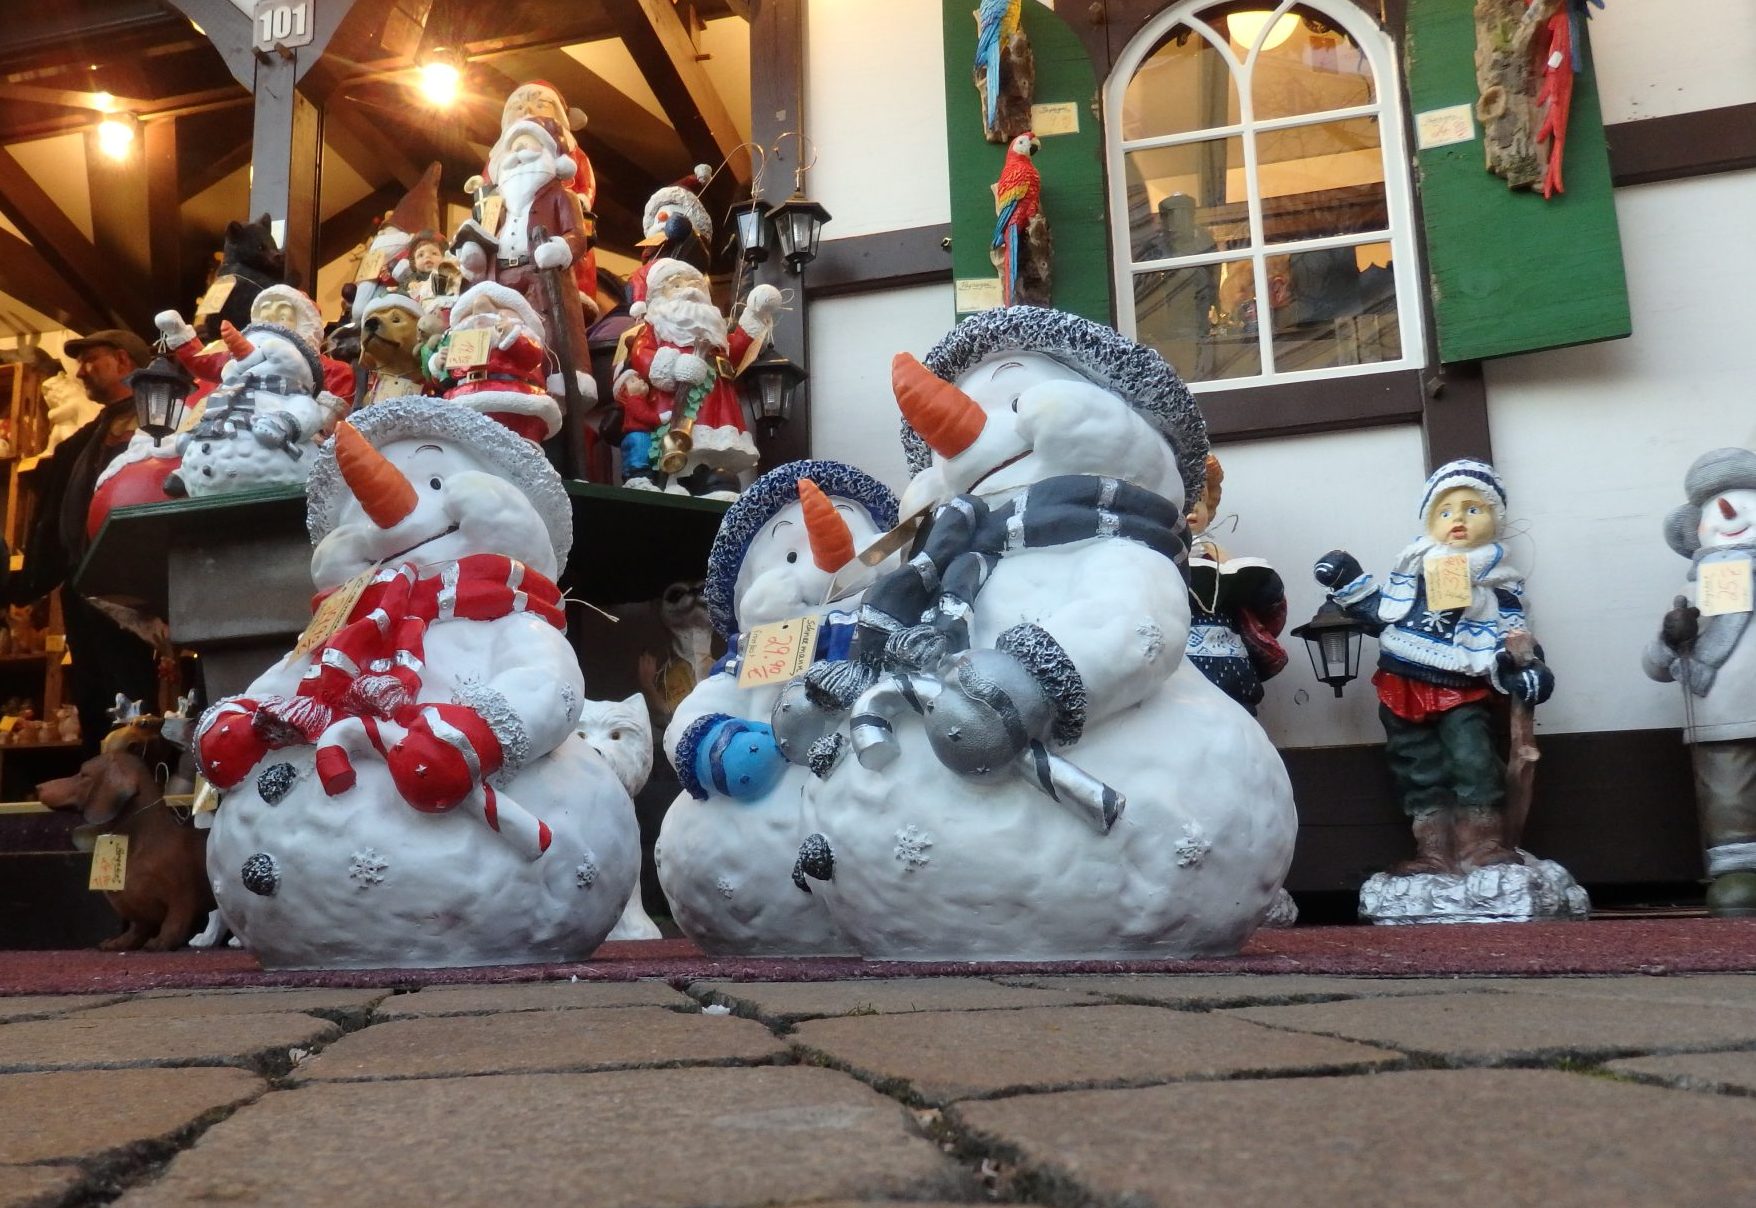 Or you can buy silly Christmas snowmen!